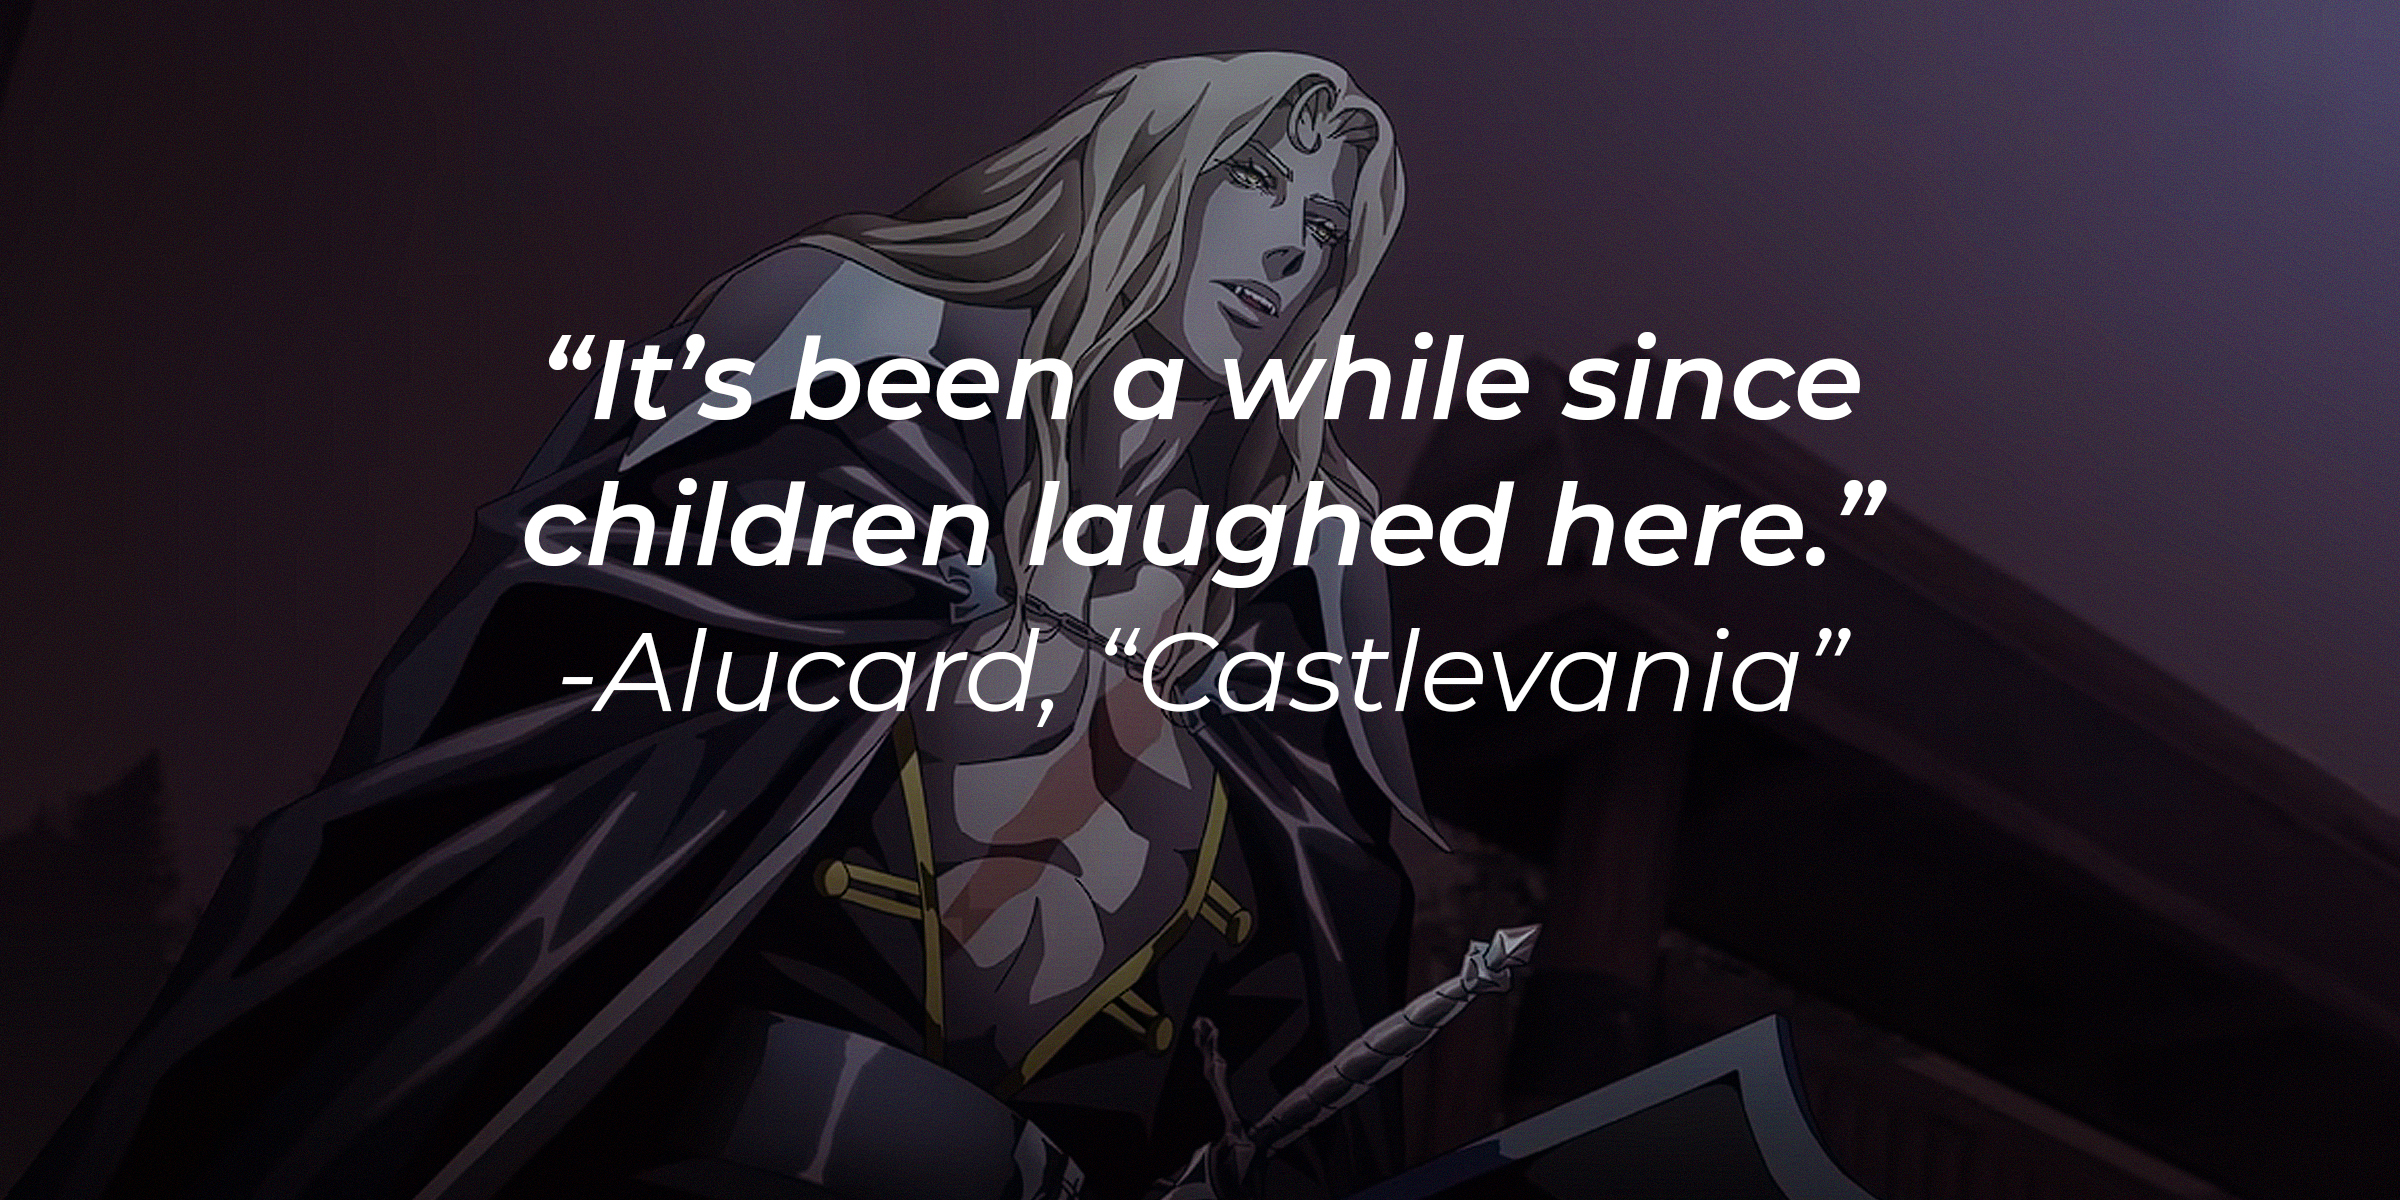 Alucard with his quote from "Castlevania:" “It’s been a while since children laughed here.” | Source: Youtube.com/Netflix